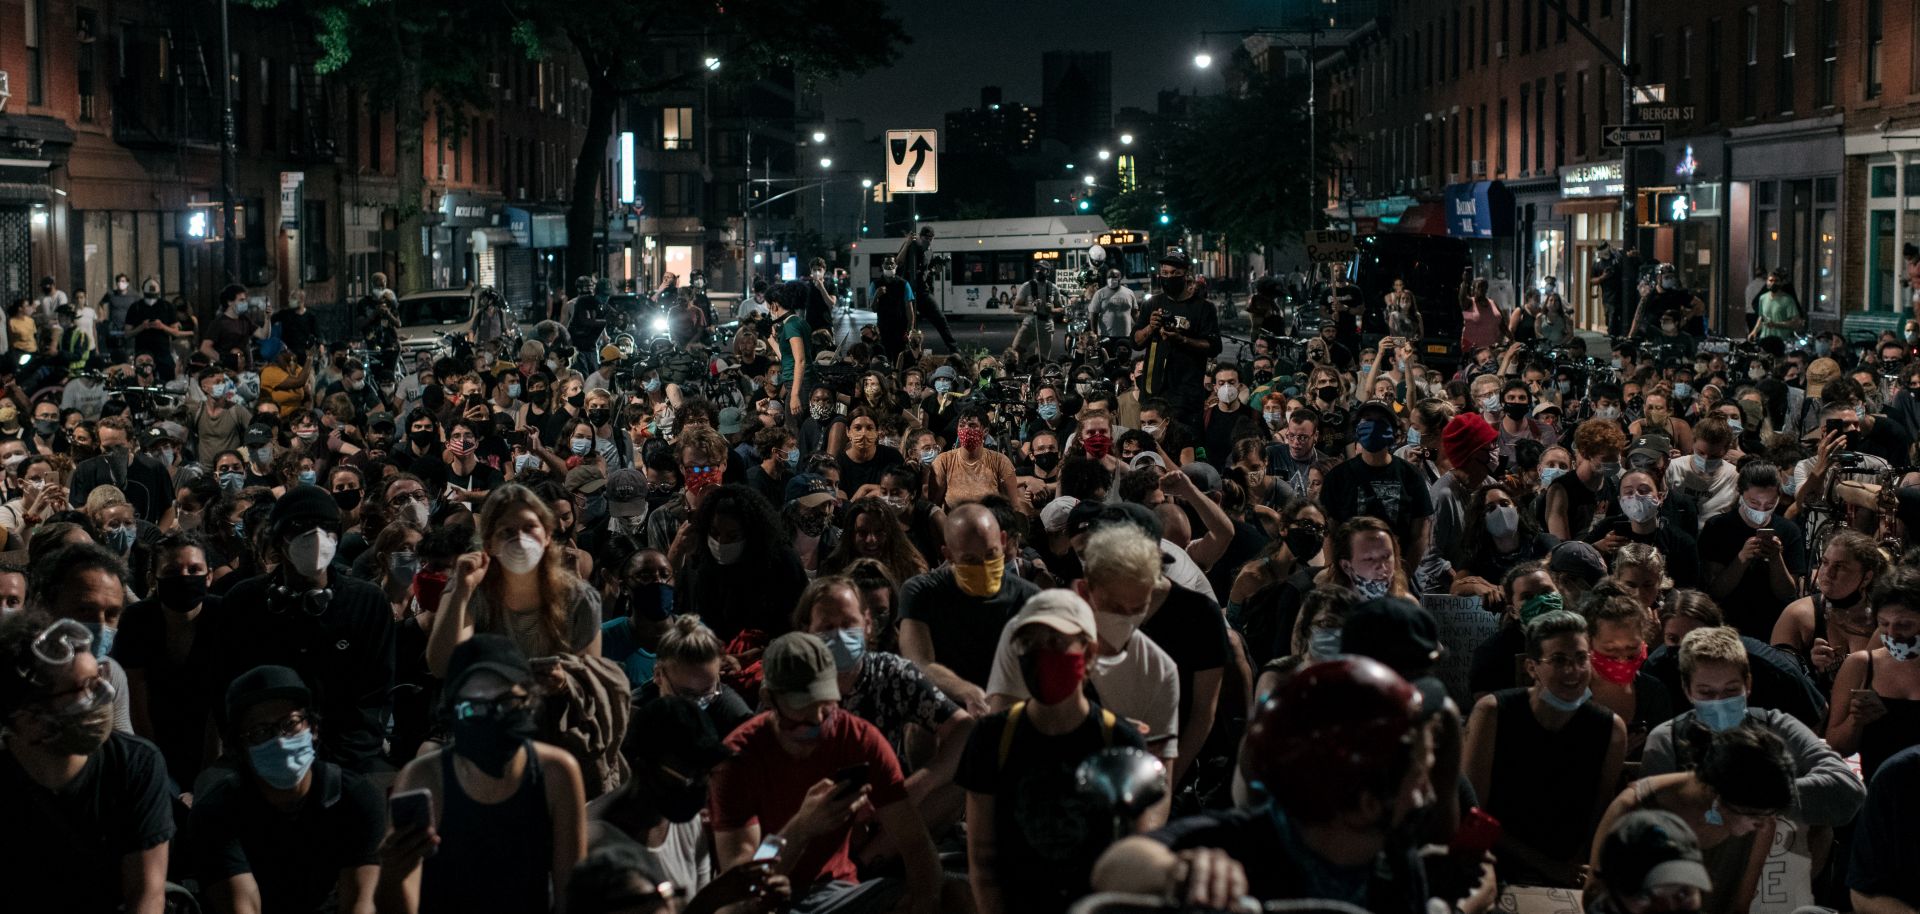 Protesters in New York City kneel at an intersection to demand an end to systemic racism and police brutality on June 11, 2020. 